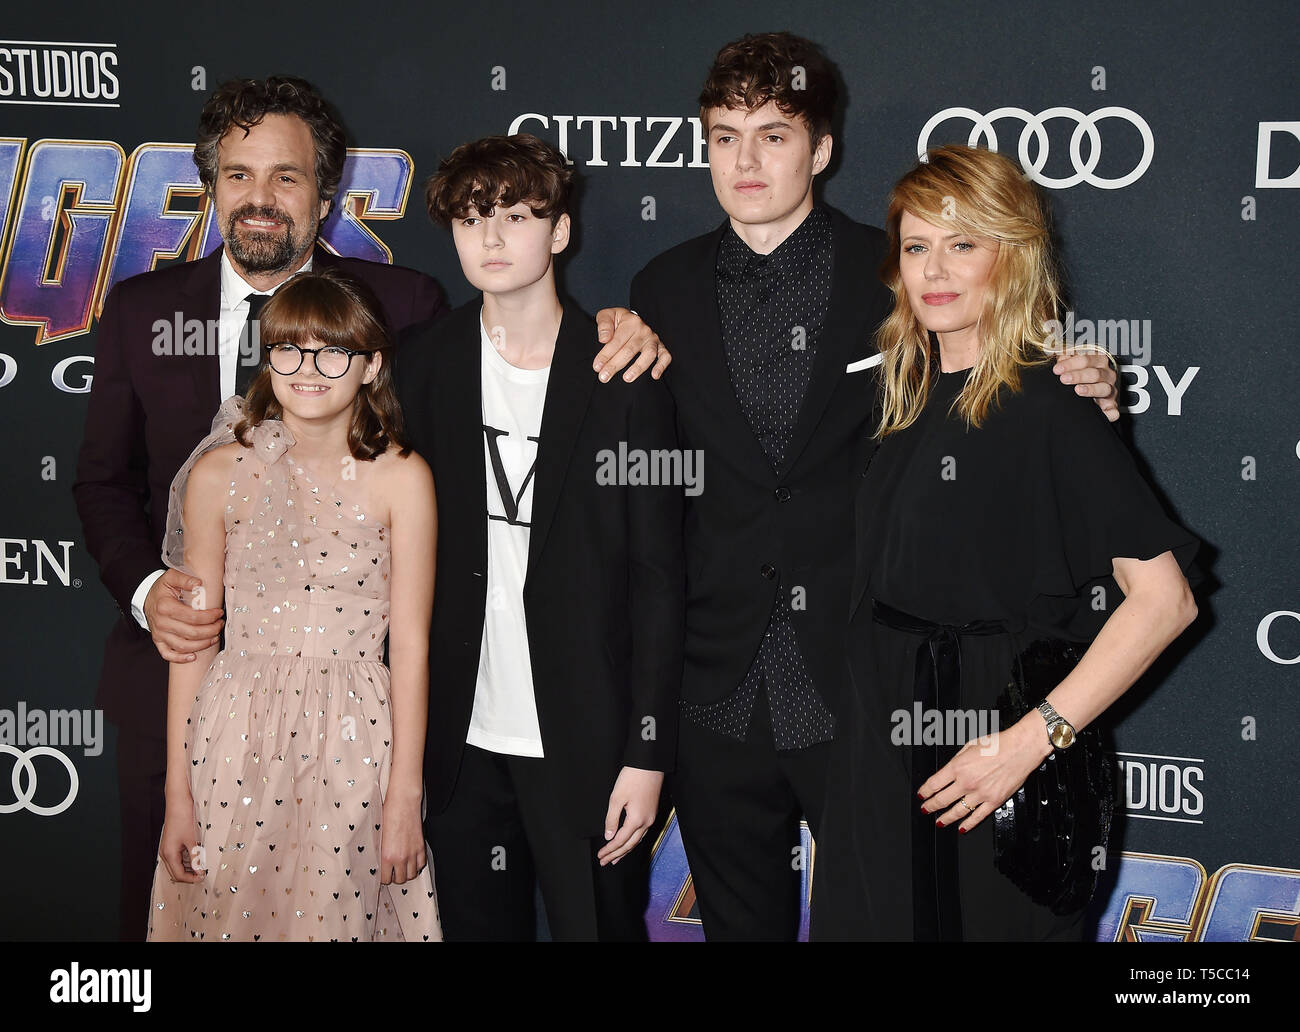 LOS ANGELES, CA - APRIL 22: (L-R) Mark Ruffalo, Odette Ruffalo, Bella Noche, Keen Ruffalo and Sunrise Coigney arrive at the world premiere Of Walt Disney Studios Motion Pictures 'Avengers: Endgame' at the Los Angeles Convention Center on April 22, 2019 in Los Angeles, California. Stock Photo